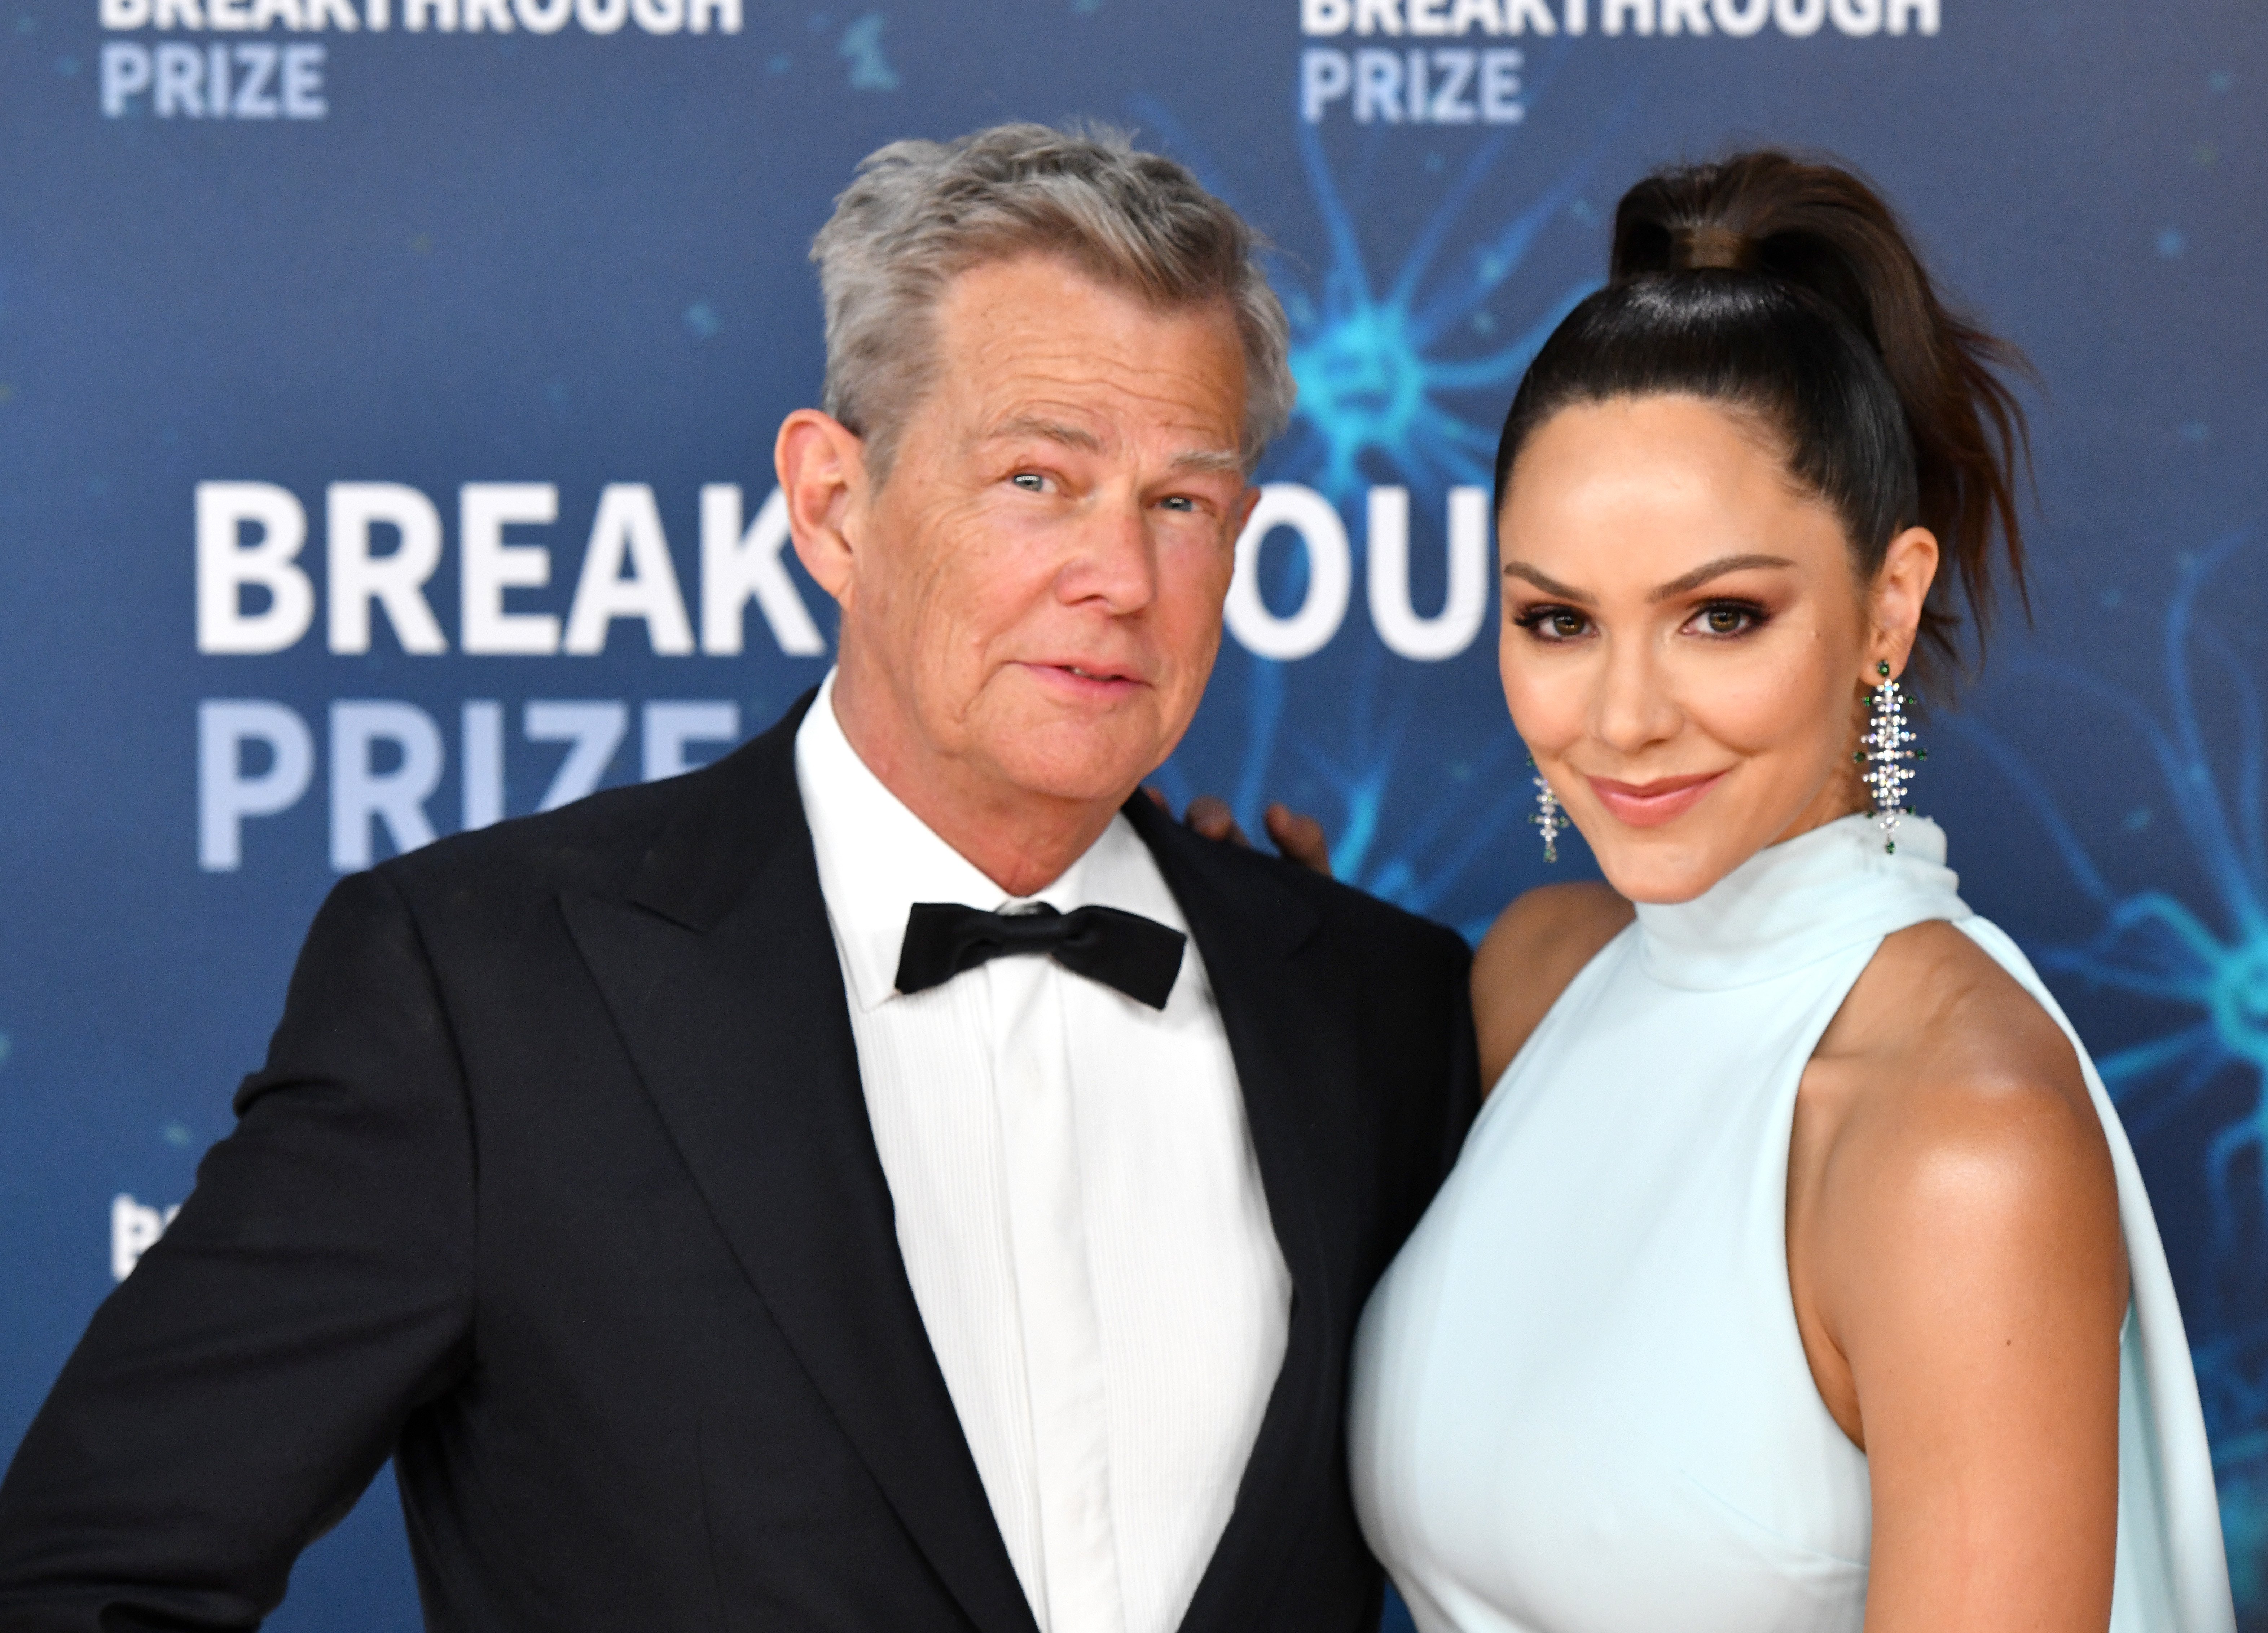 David Foster and Katharine McPhee pictured at the 2020 Breakthrough Prize Red Carpet at NASA Ames Research Center, California. | Photo: Getty Images